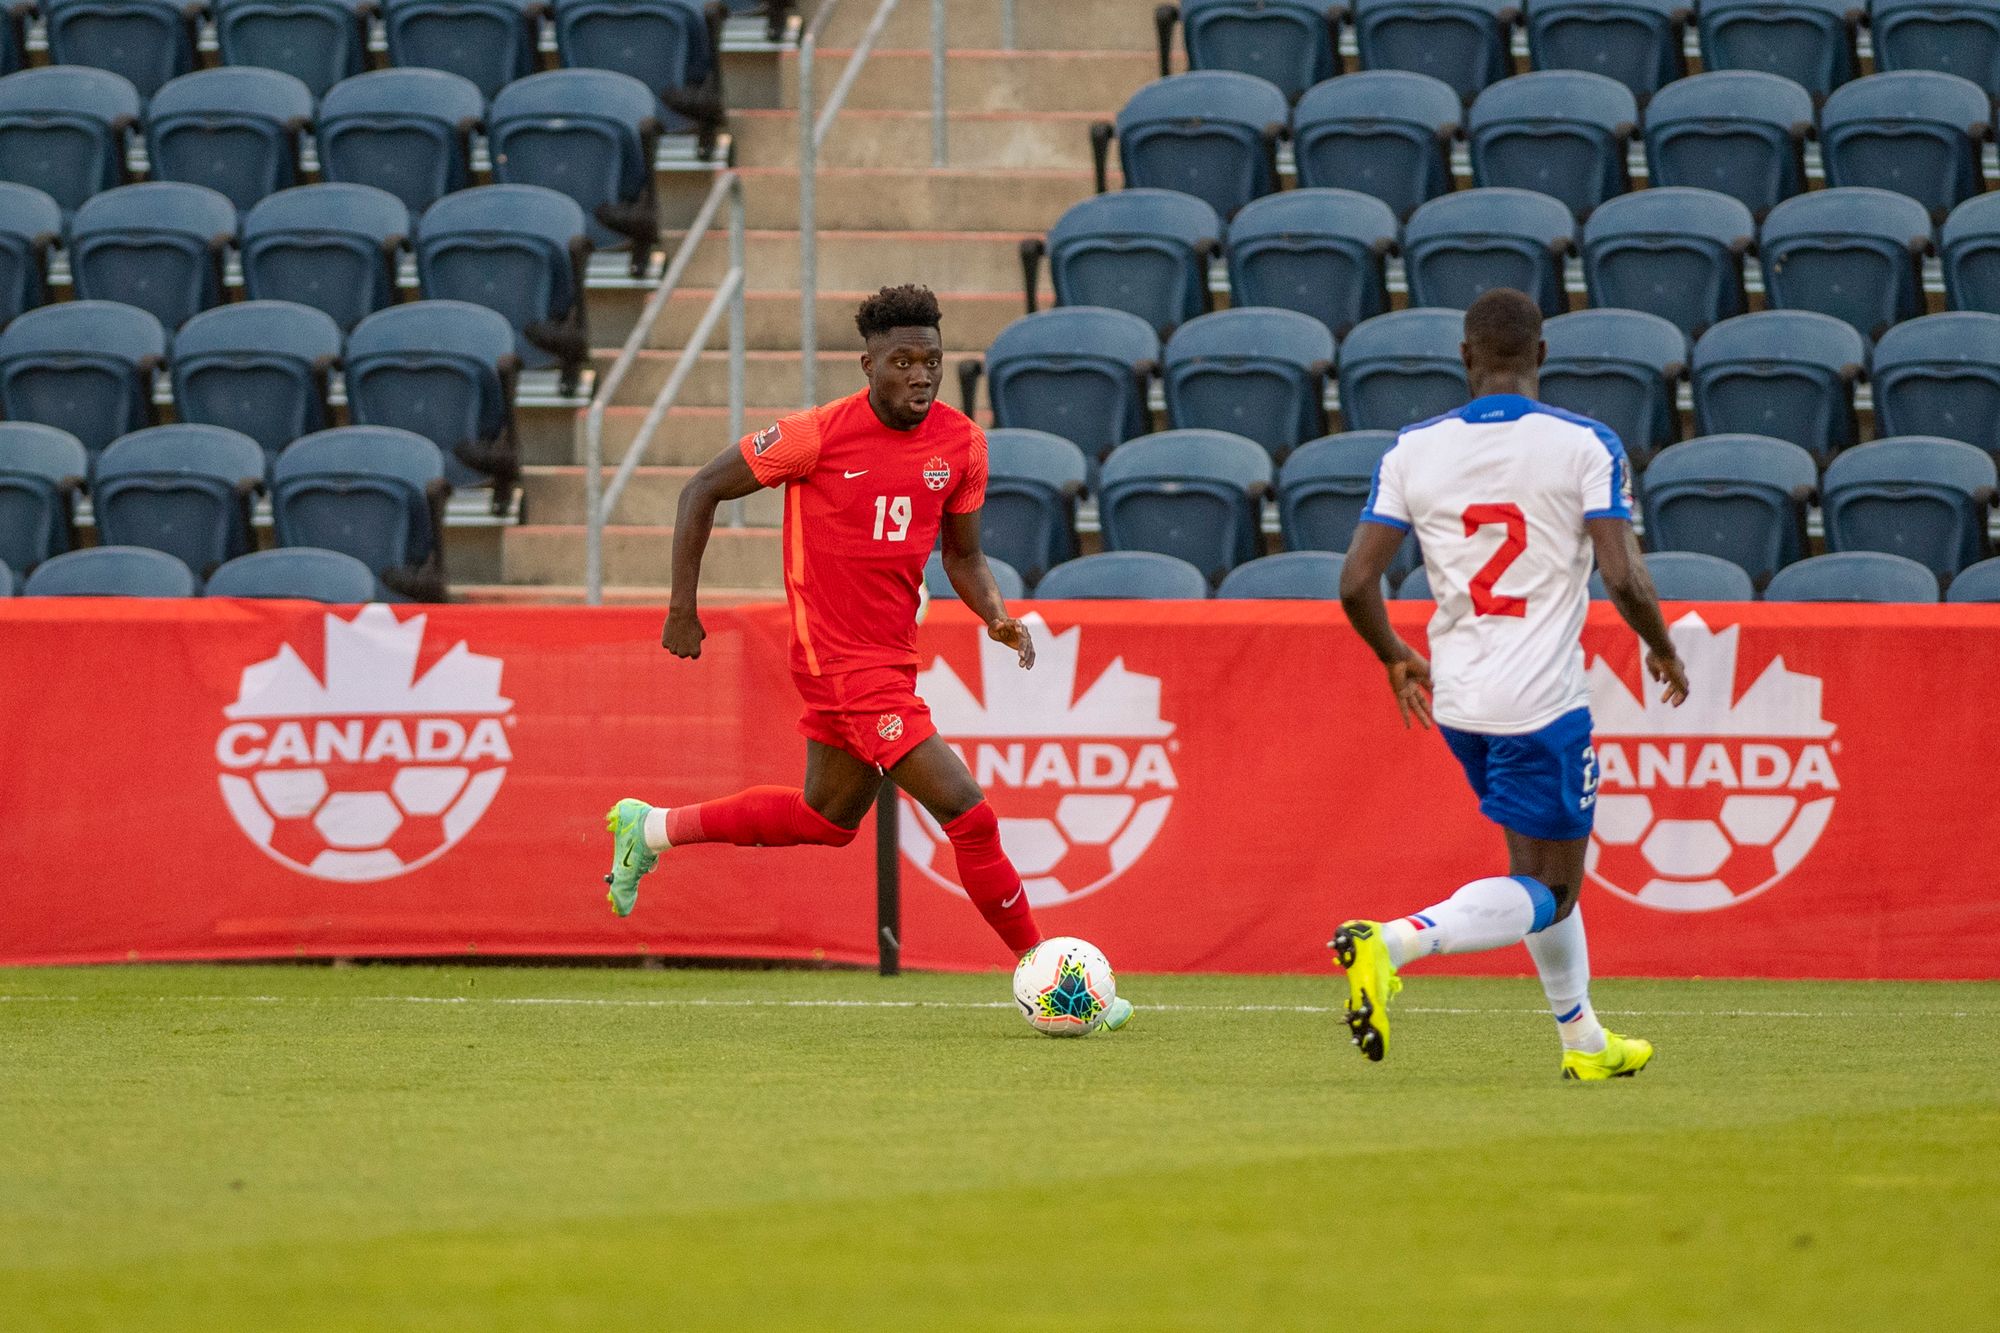 Canada blanks Haiti to move on in Concacaf World Cup qualifying